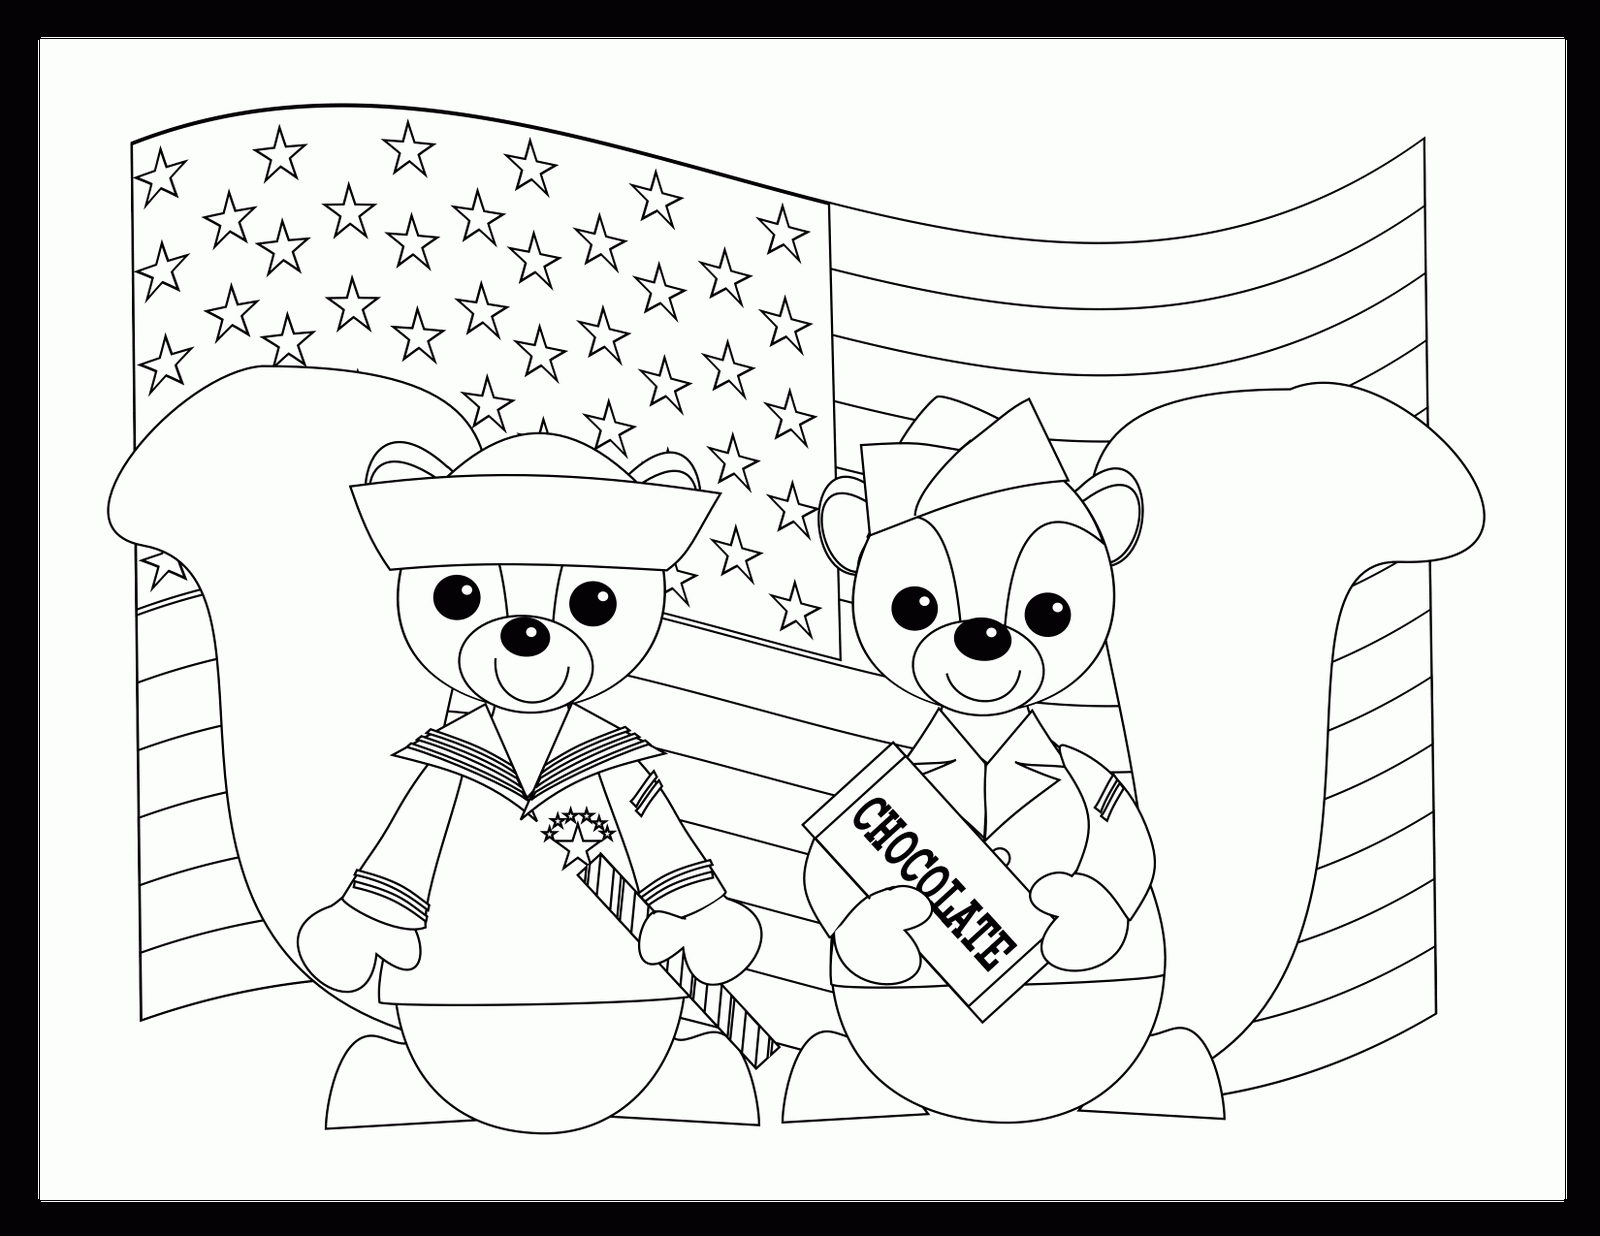 Coloring Pages For Veterans Day - Free coloring pages